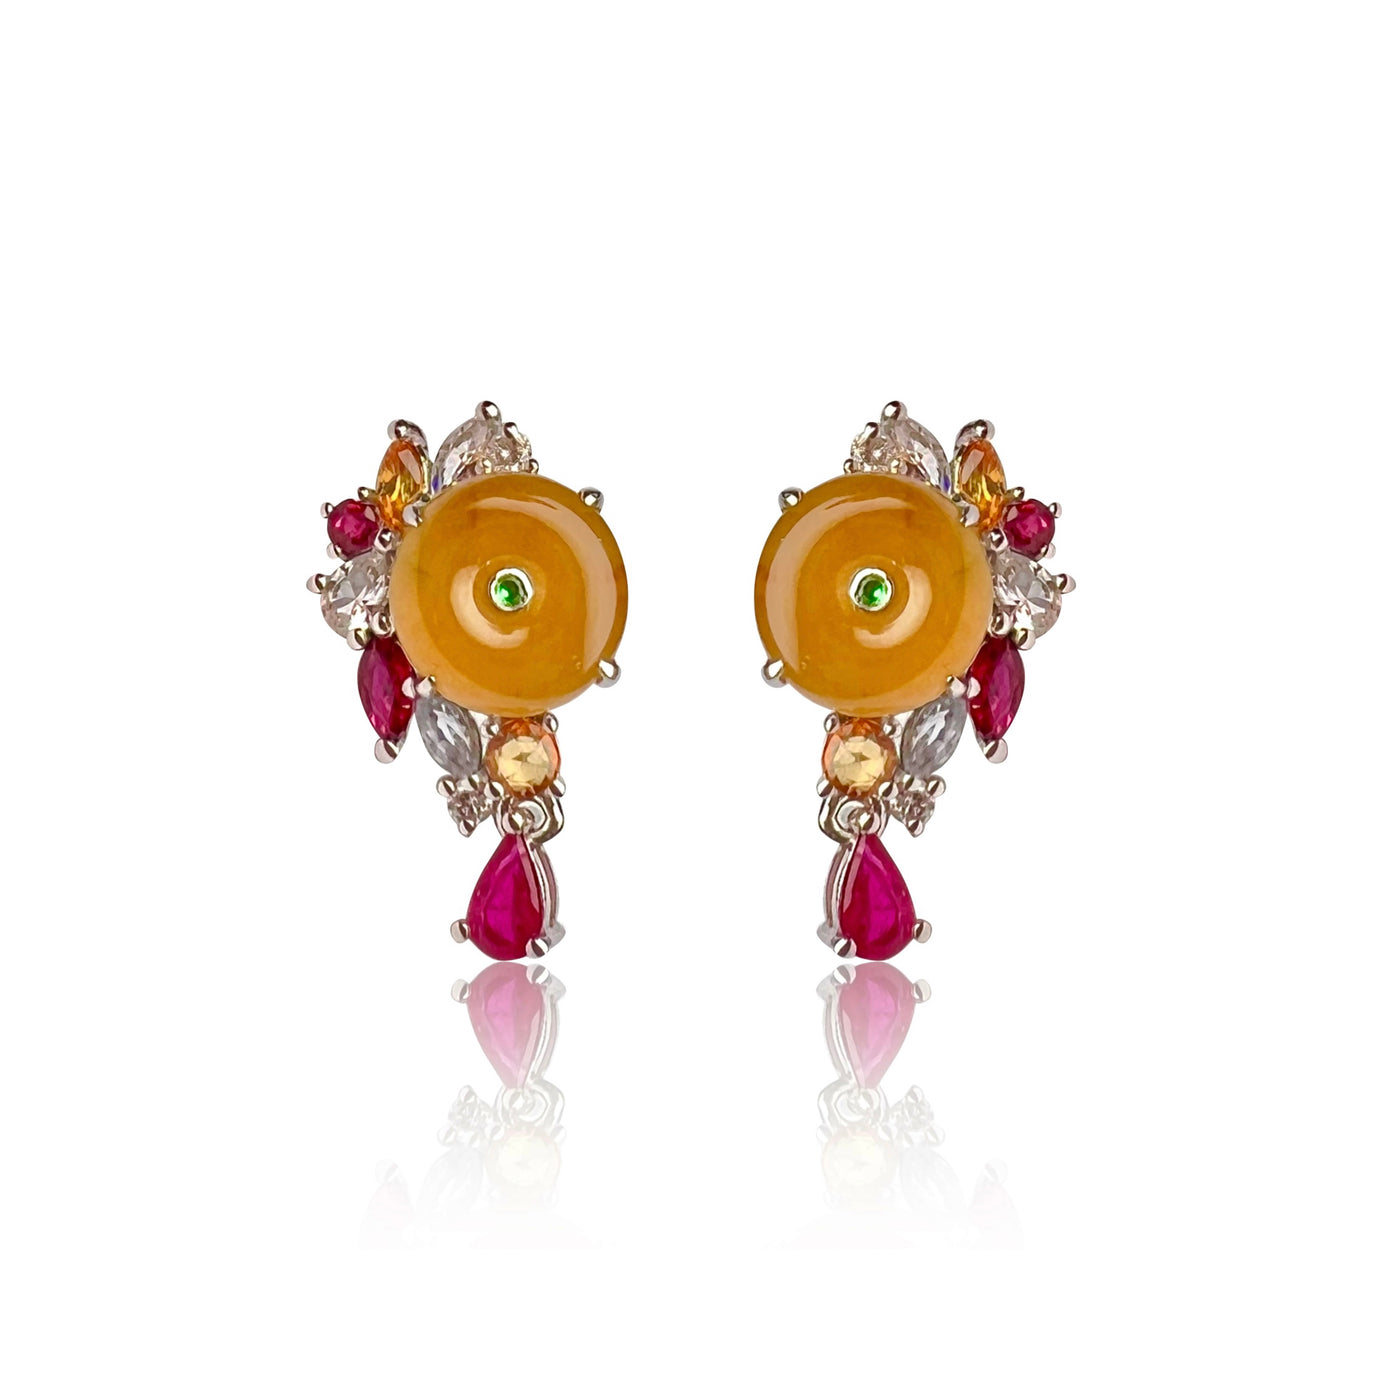 YELLOW JADEITE EARRINGS IN 18K WHITE GOLD WITH DIAMOND AND RUBY